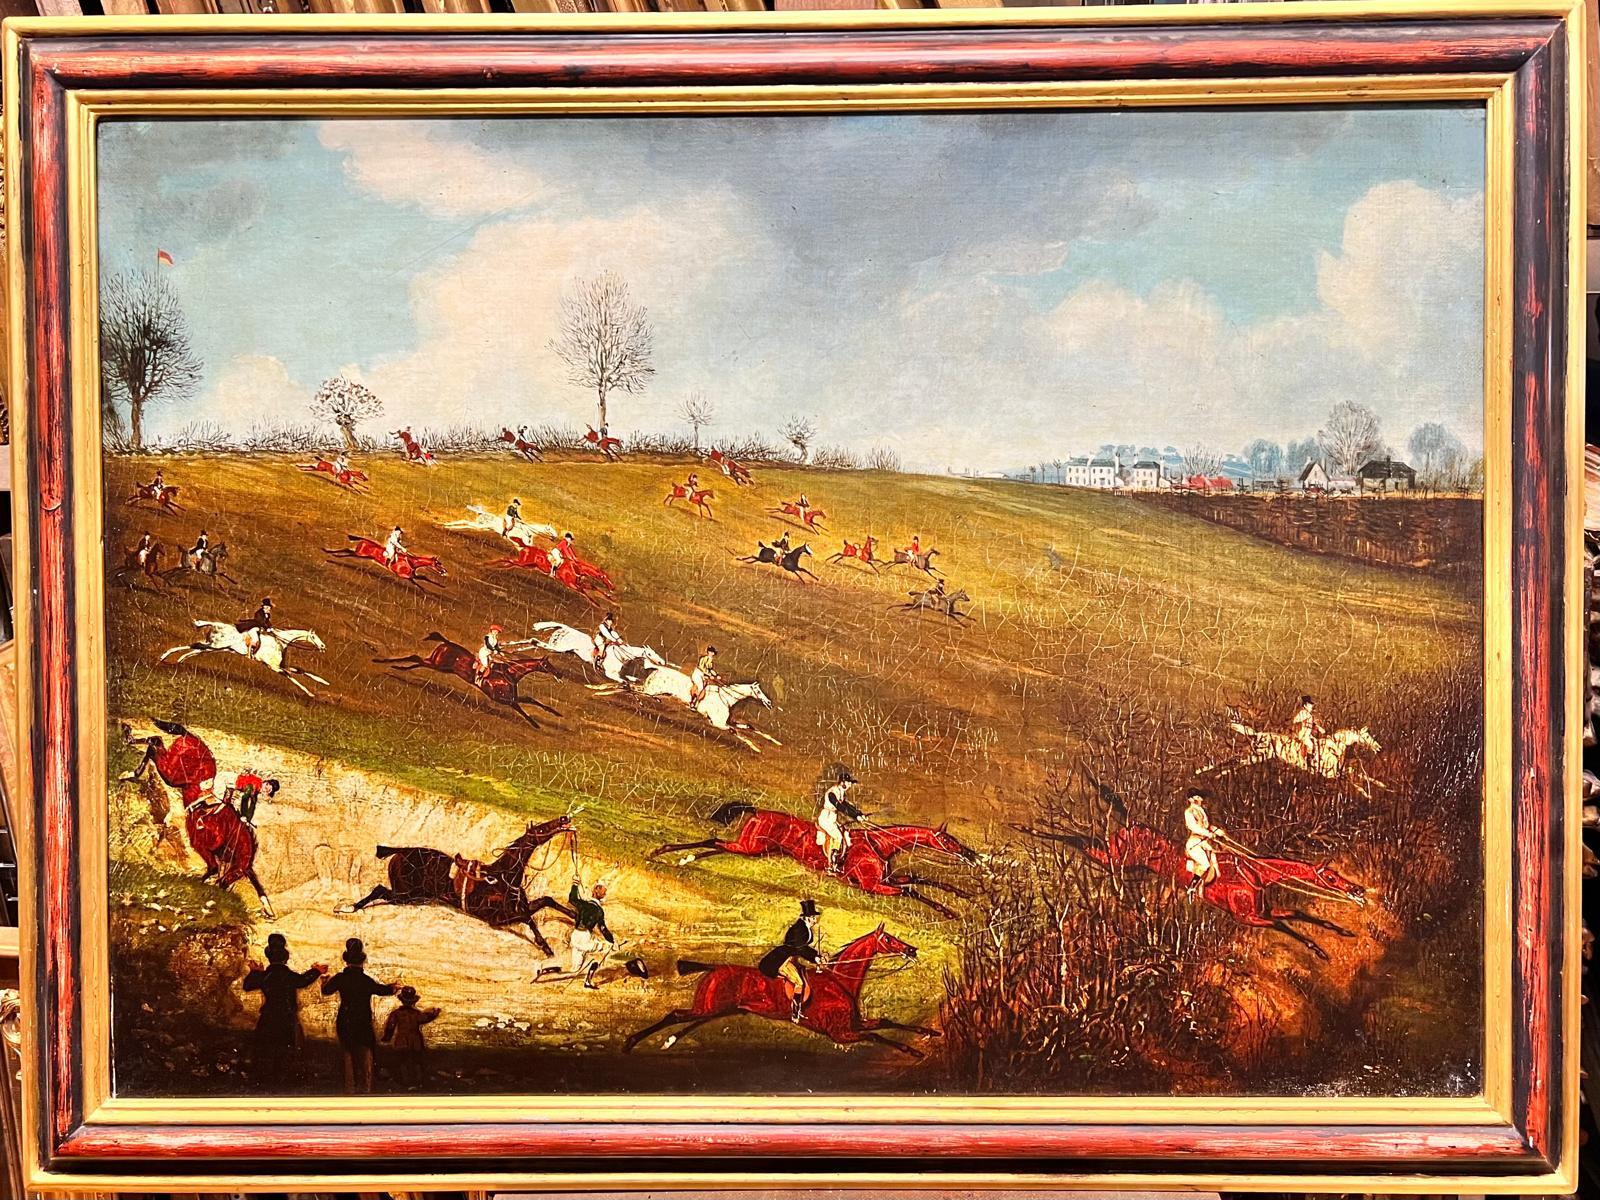 Huge British Sporting Countryside Horse Racing Steeple Chase Scene - Painting by James Pollard